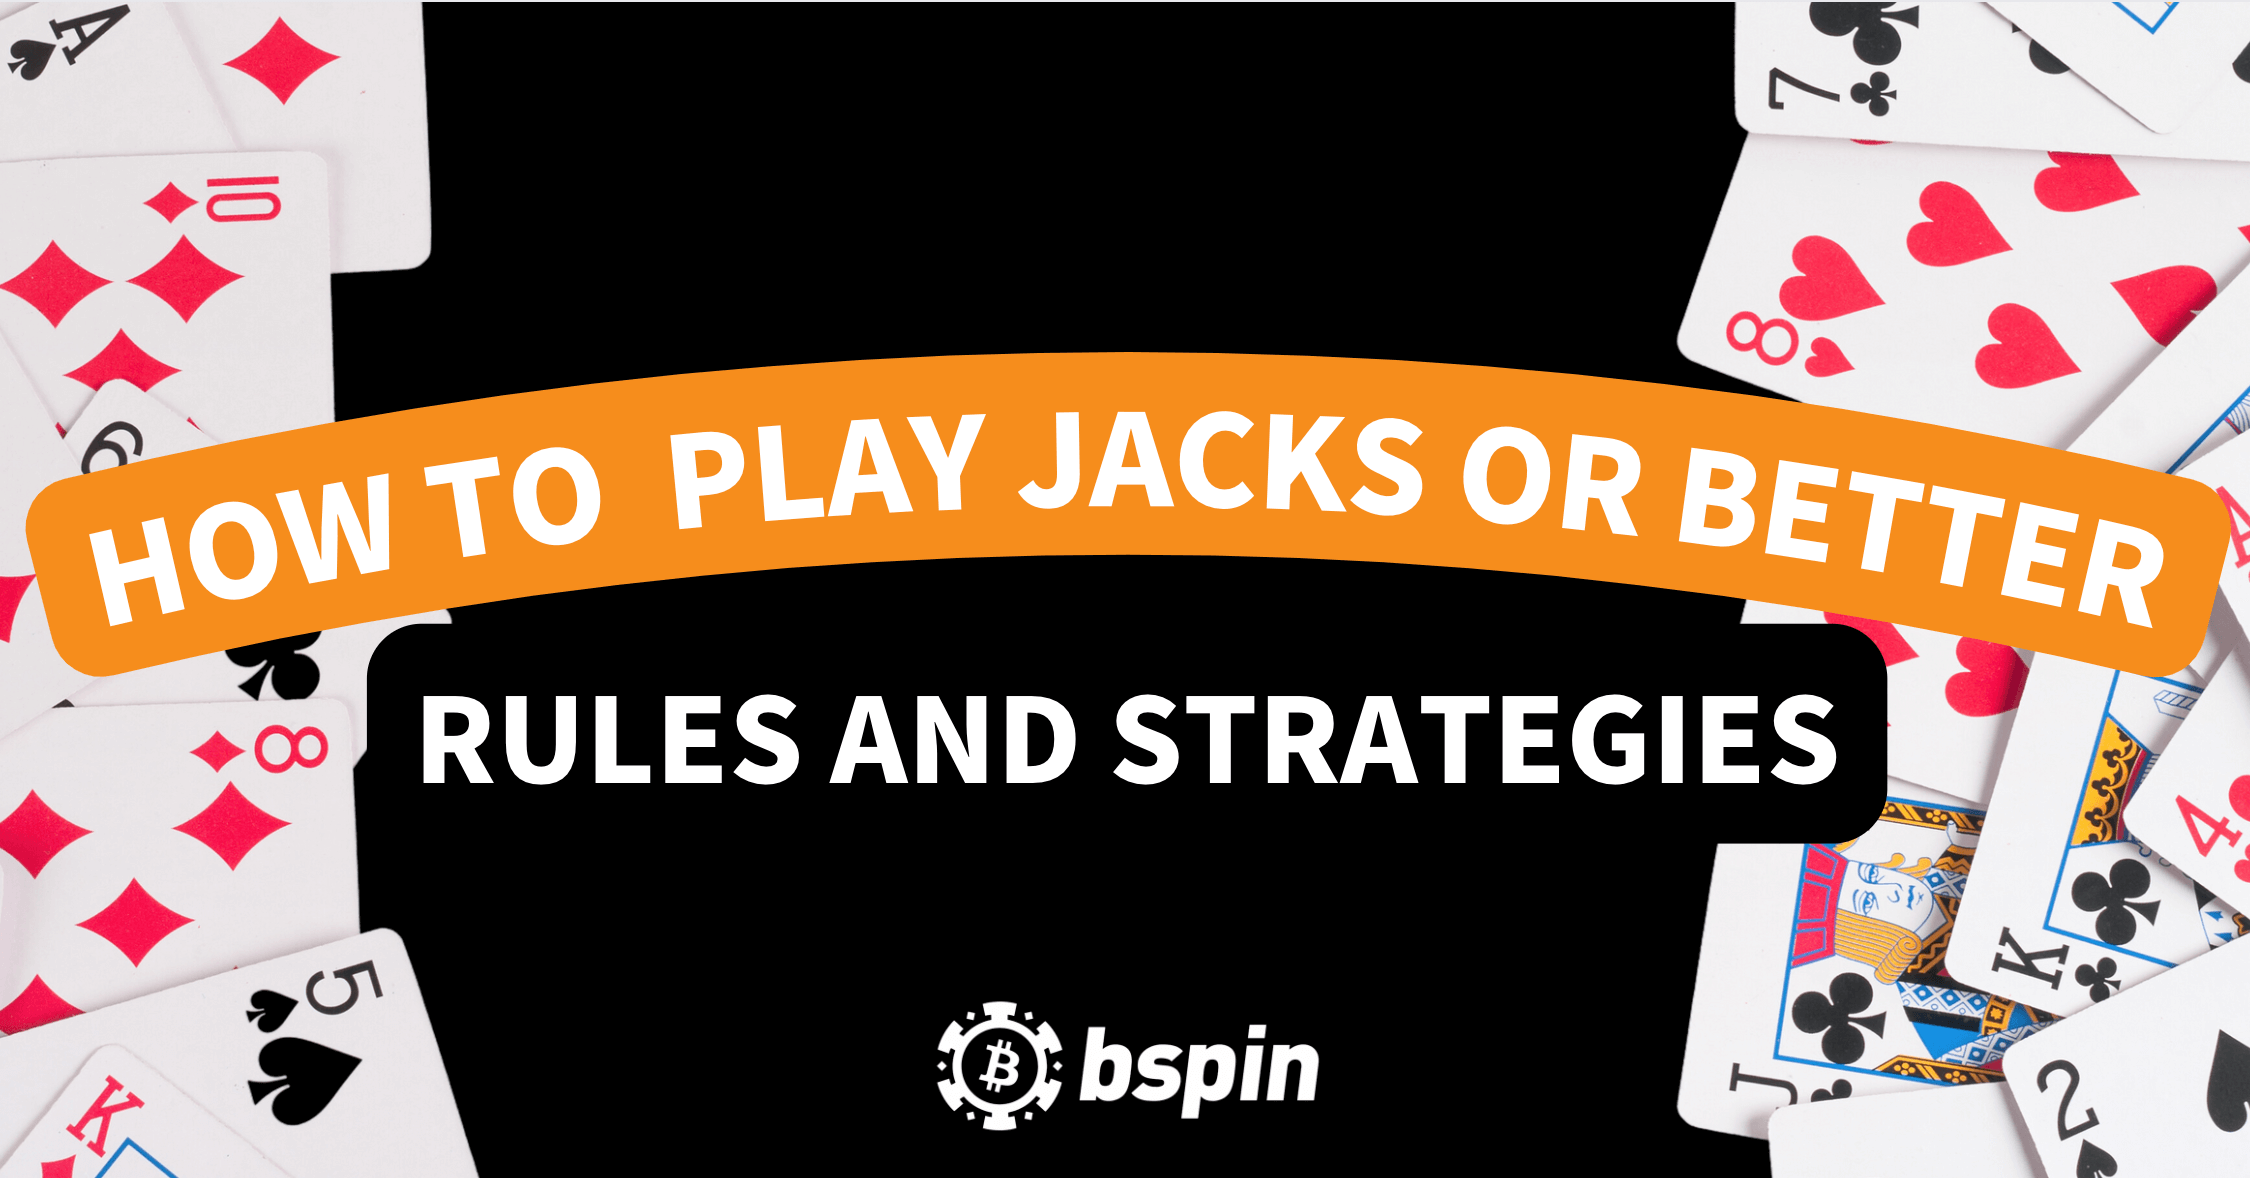 What's the Role of Luck in Achieving Consistent Wins in Jacks or Better?